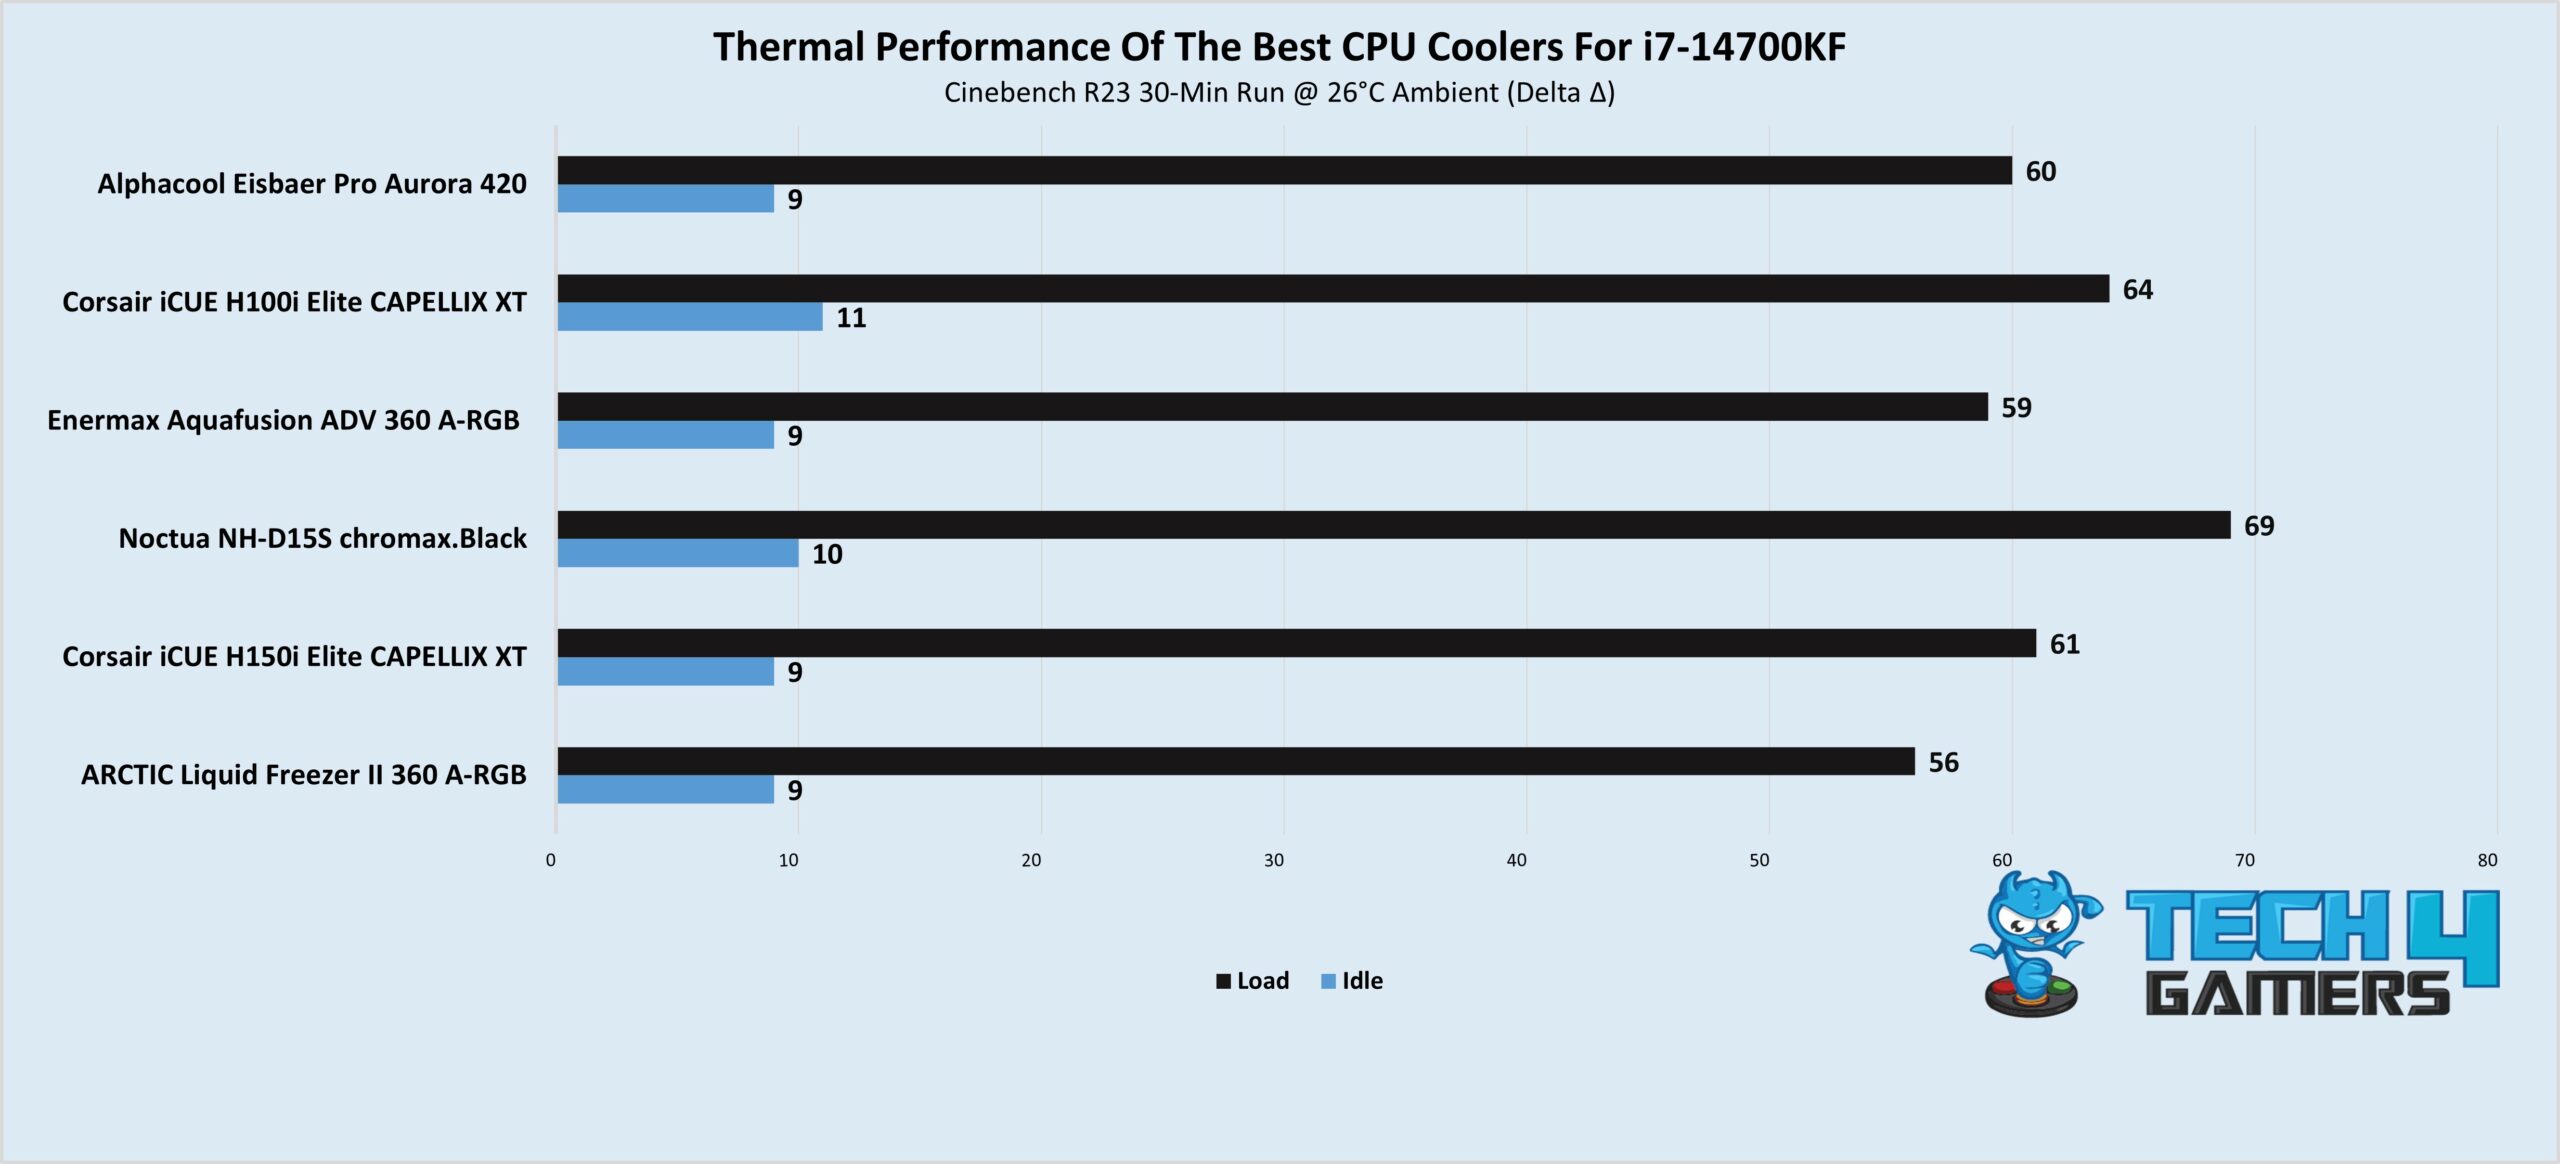 Thermal Performance Of The Best CPU Coolers For i7-14700KF